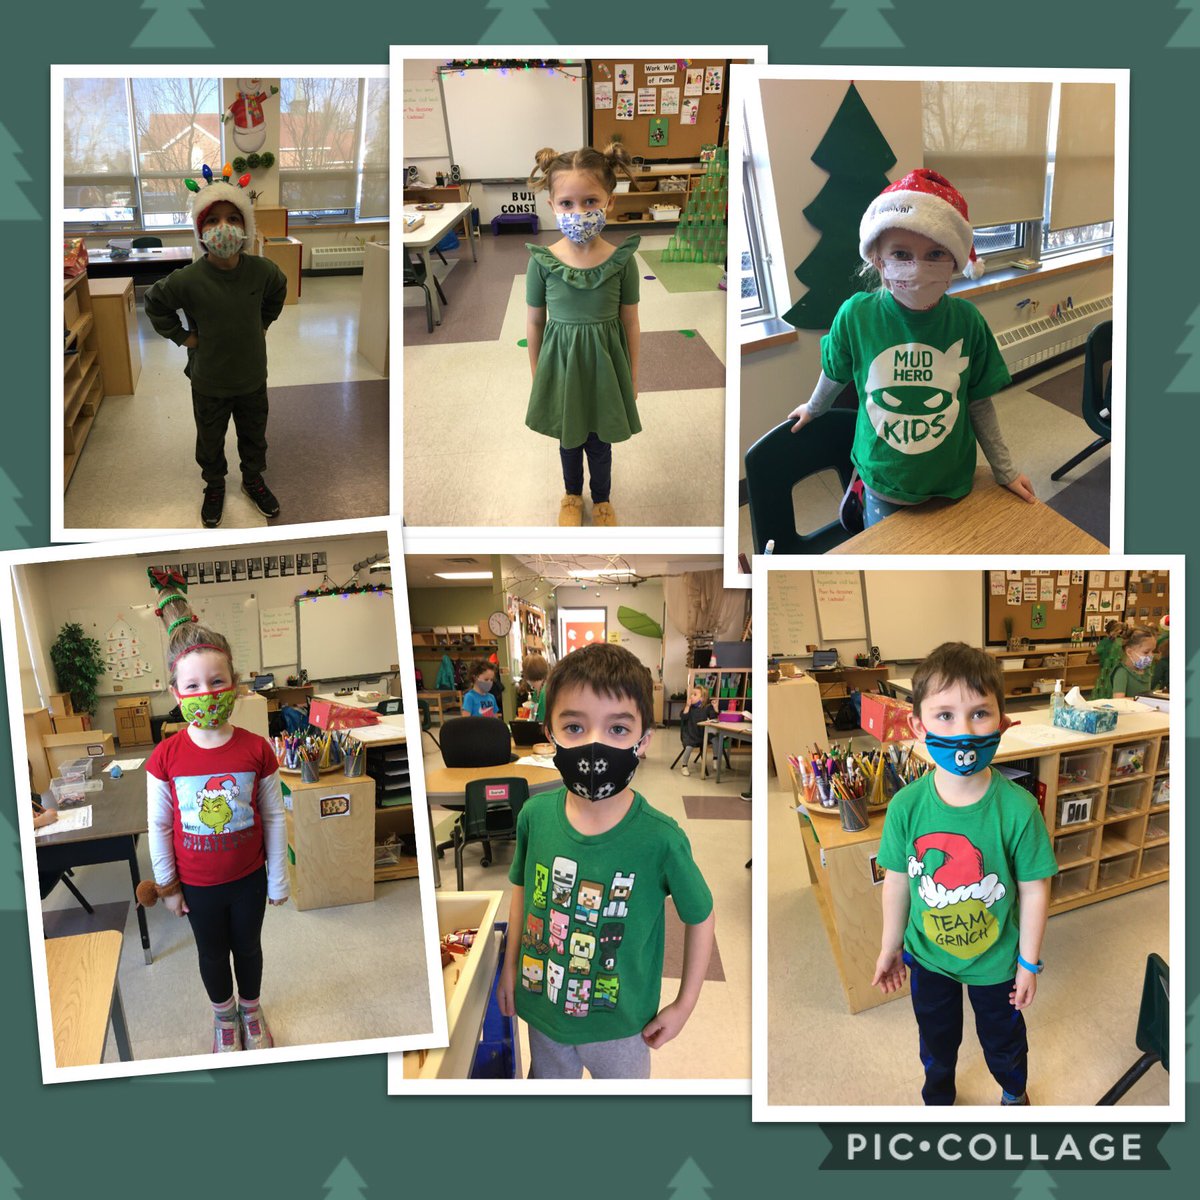 It’s #GrinchDay at @StLeonardOCSB and we brought in our toonies to help support @sghottawa. We can’t wait to see the grand total on Friday! #toonieTuesday #GivingTuesday2020 #ocsbBeCommunity #ocsbAdvent